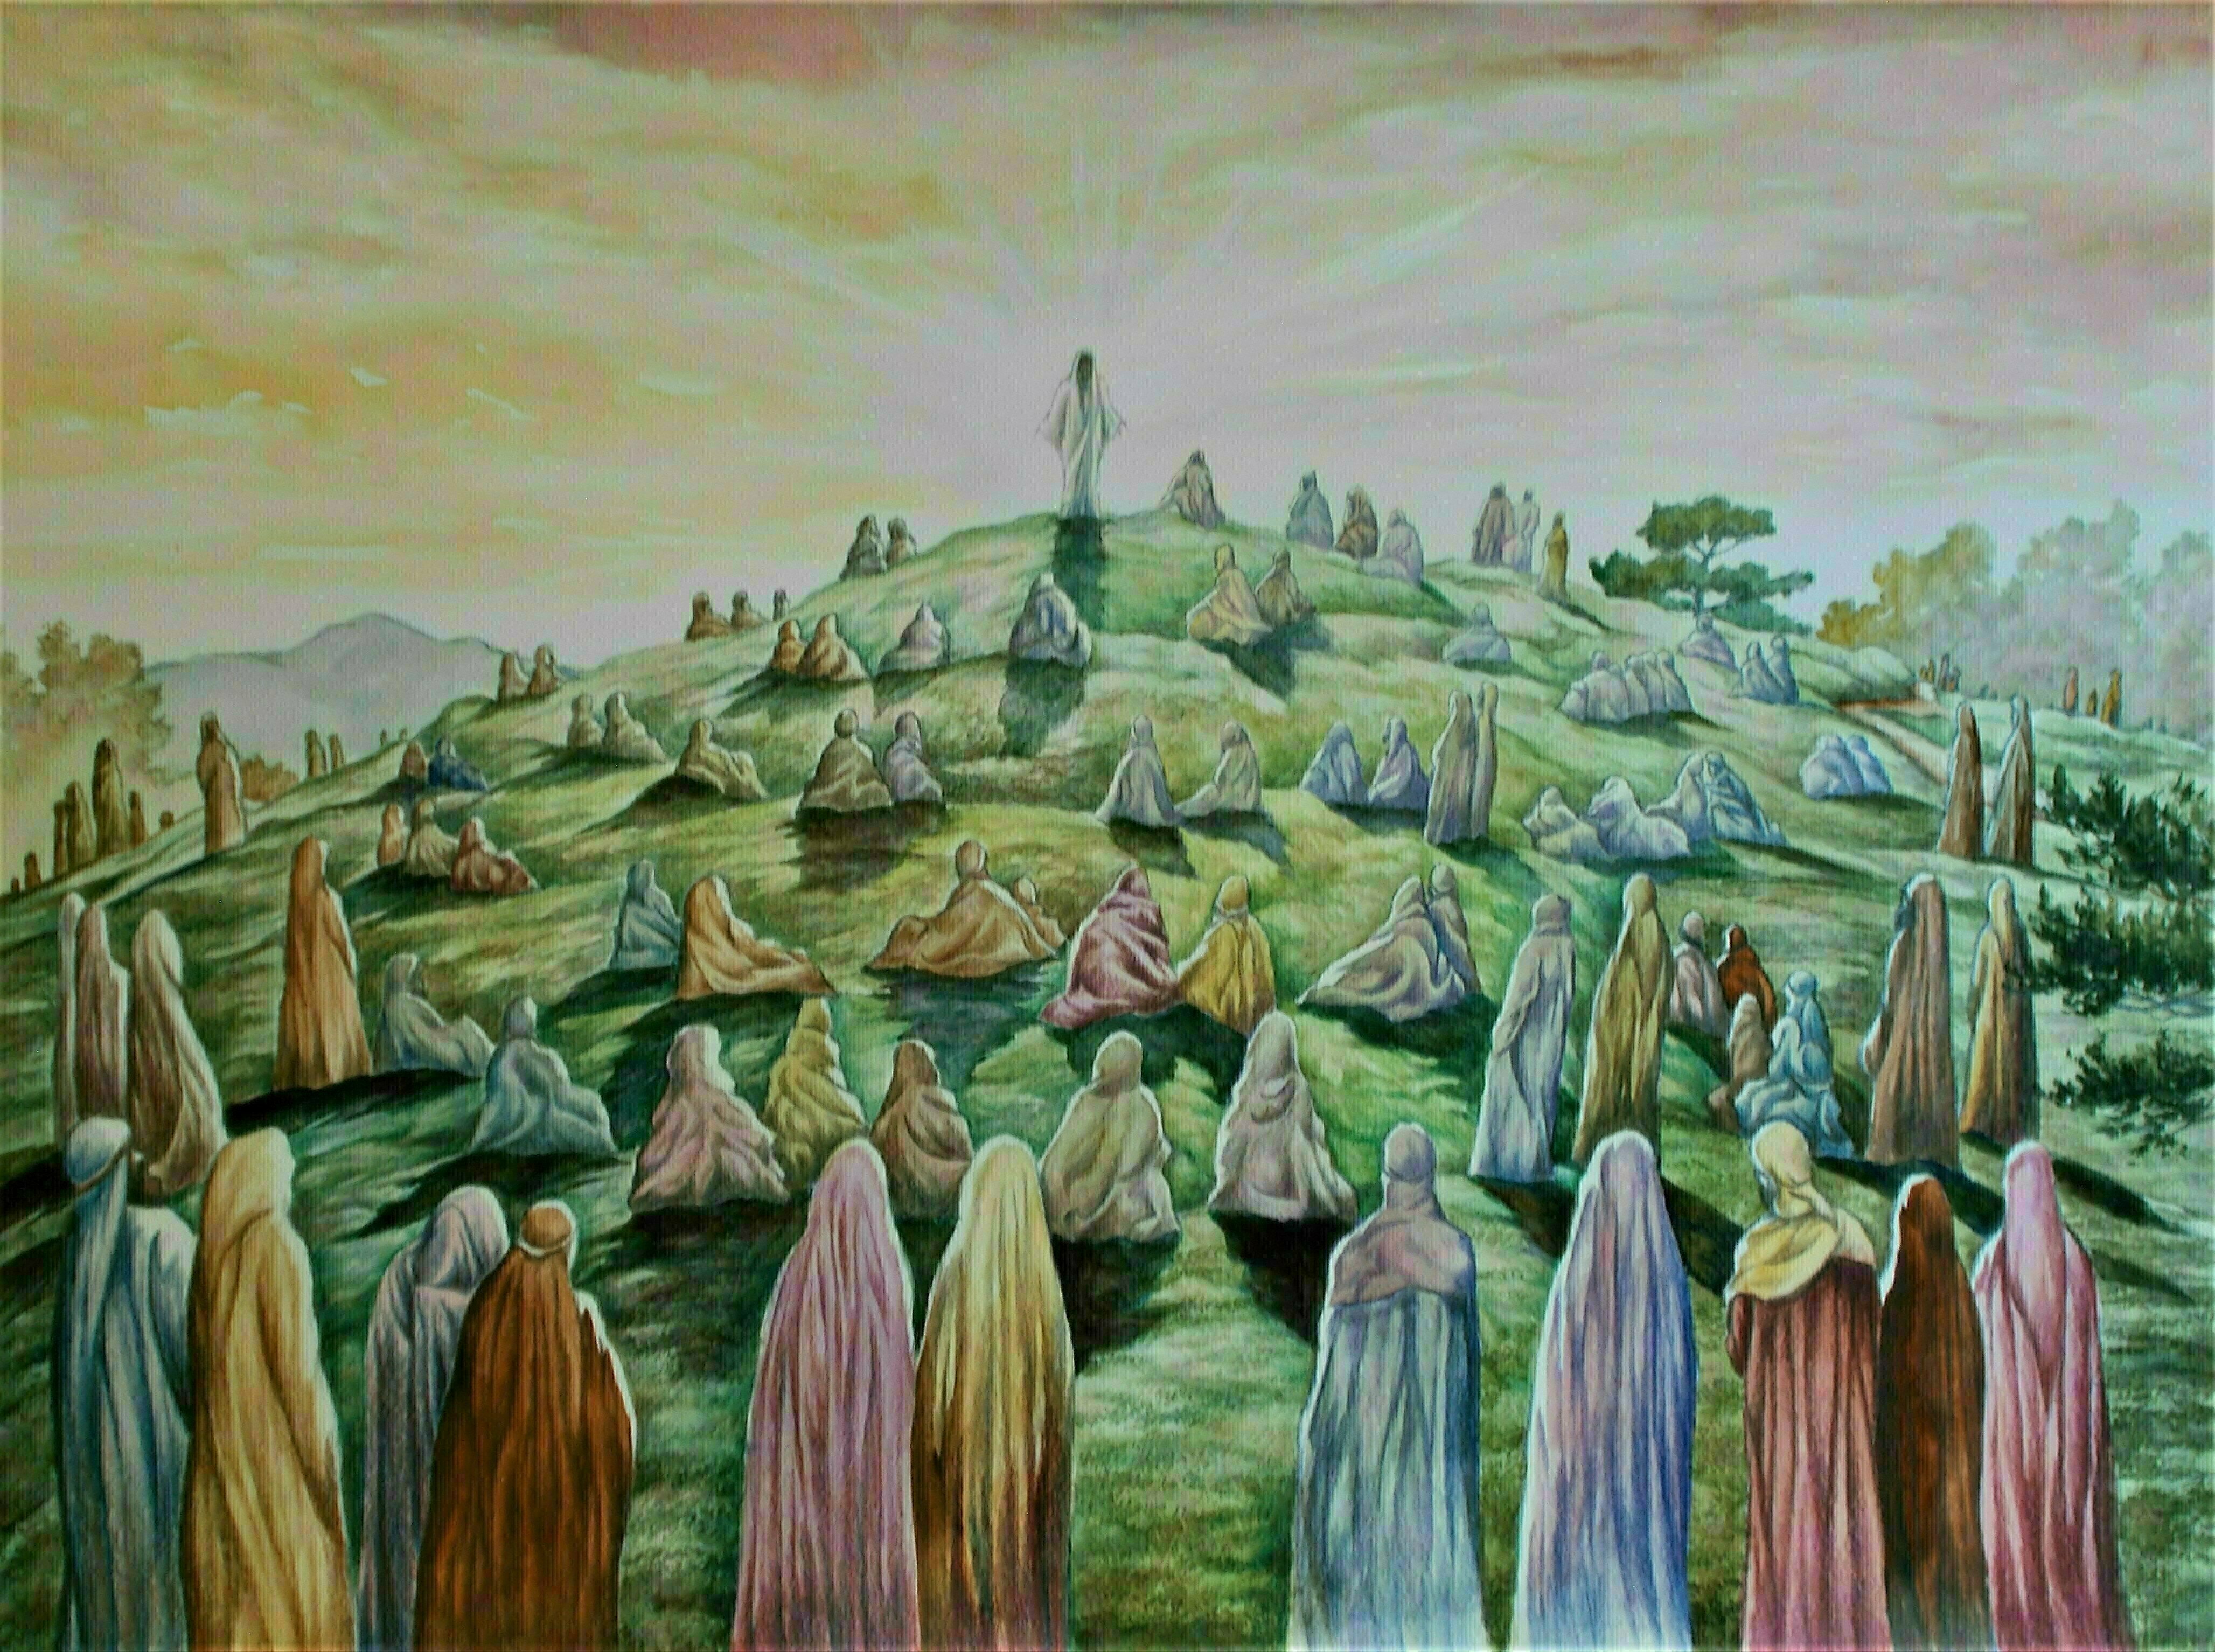 Jim Collins: 'Jesus sermon on the mount', 2013 Illustration, Biblical. Jesus delivers the blessings and attitudes for His followers on the mount...